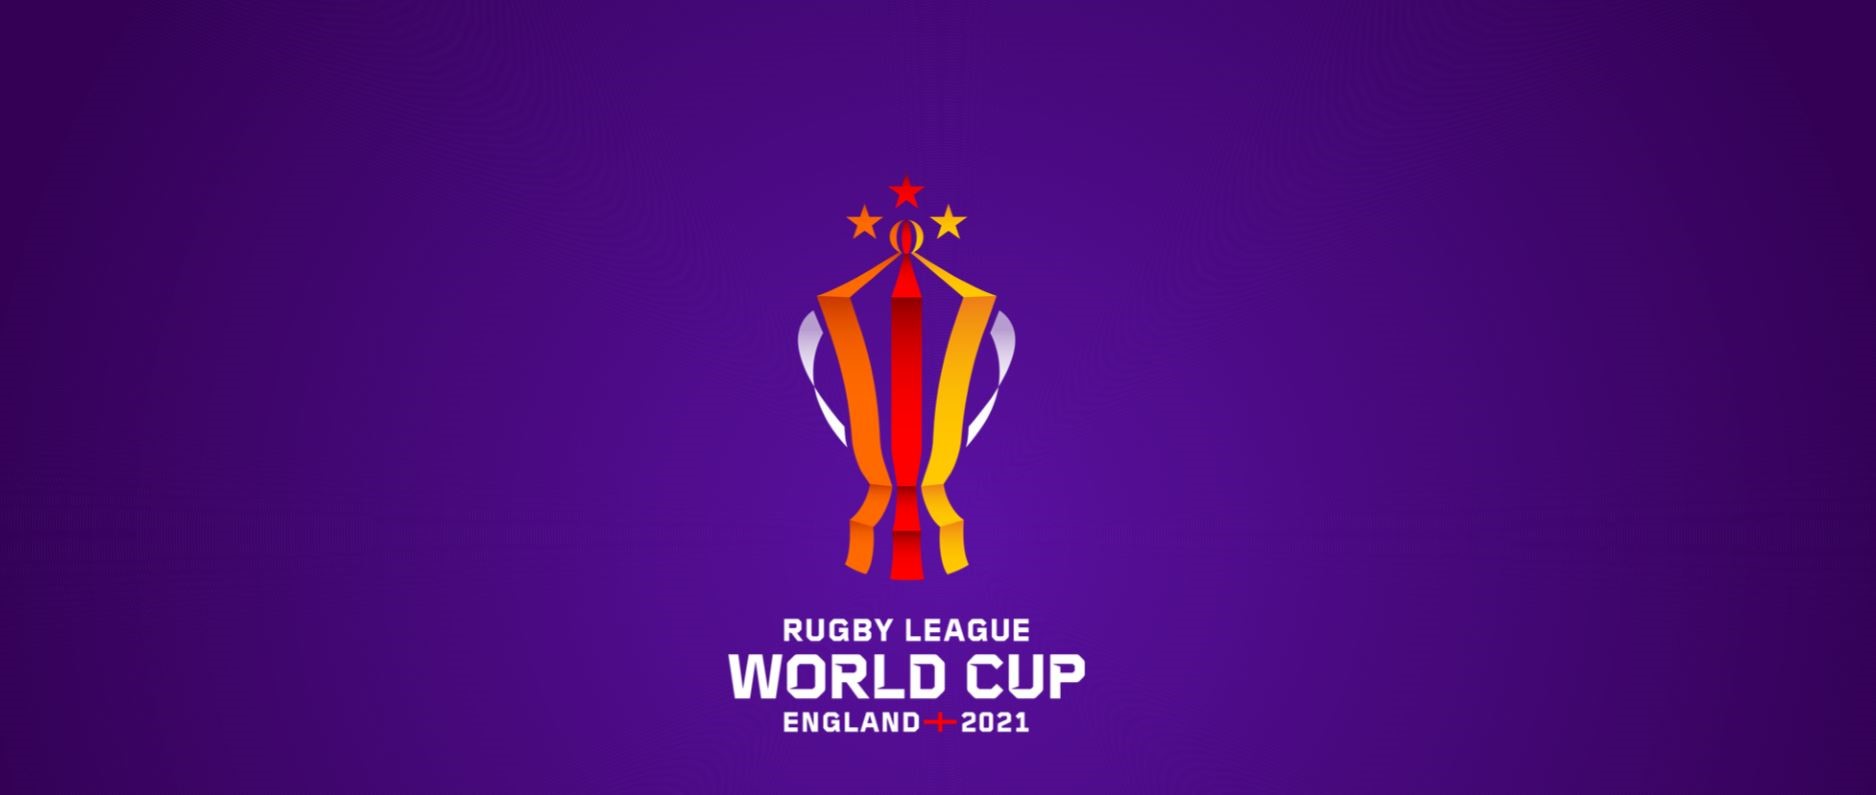 Rugby League World Cup trophy on purple background